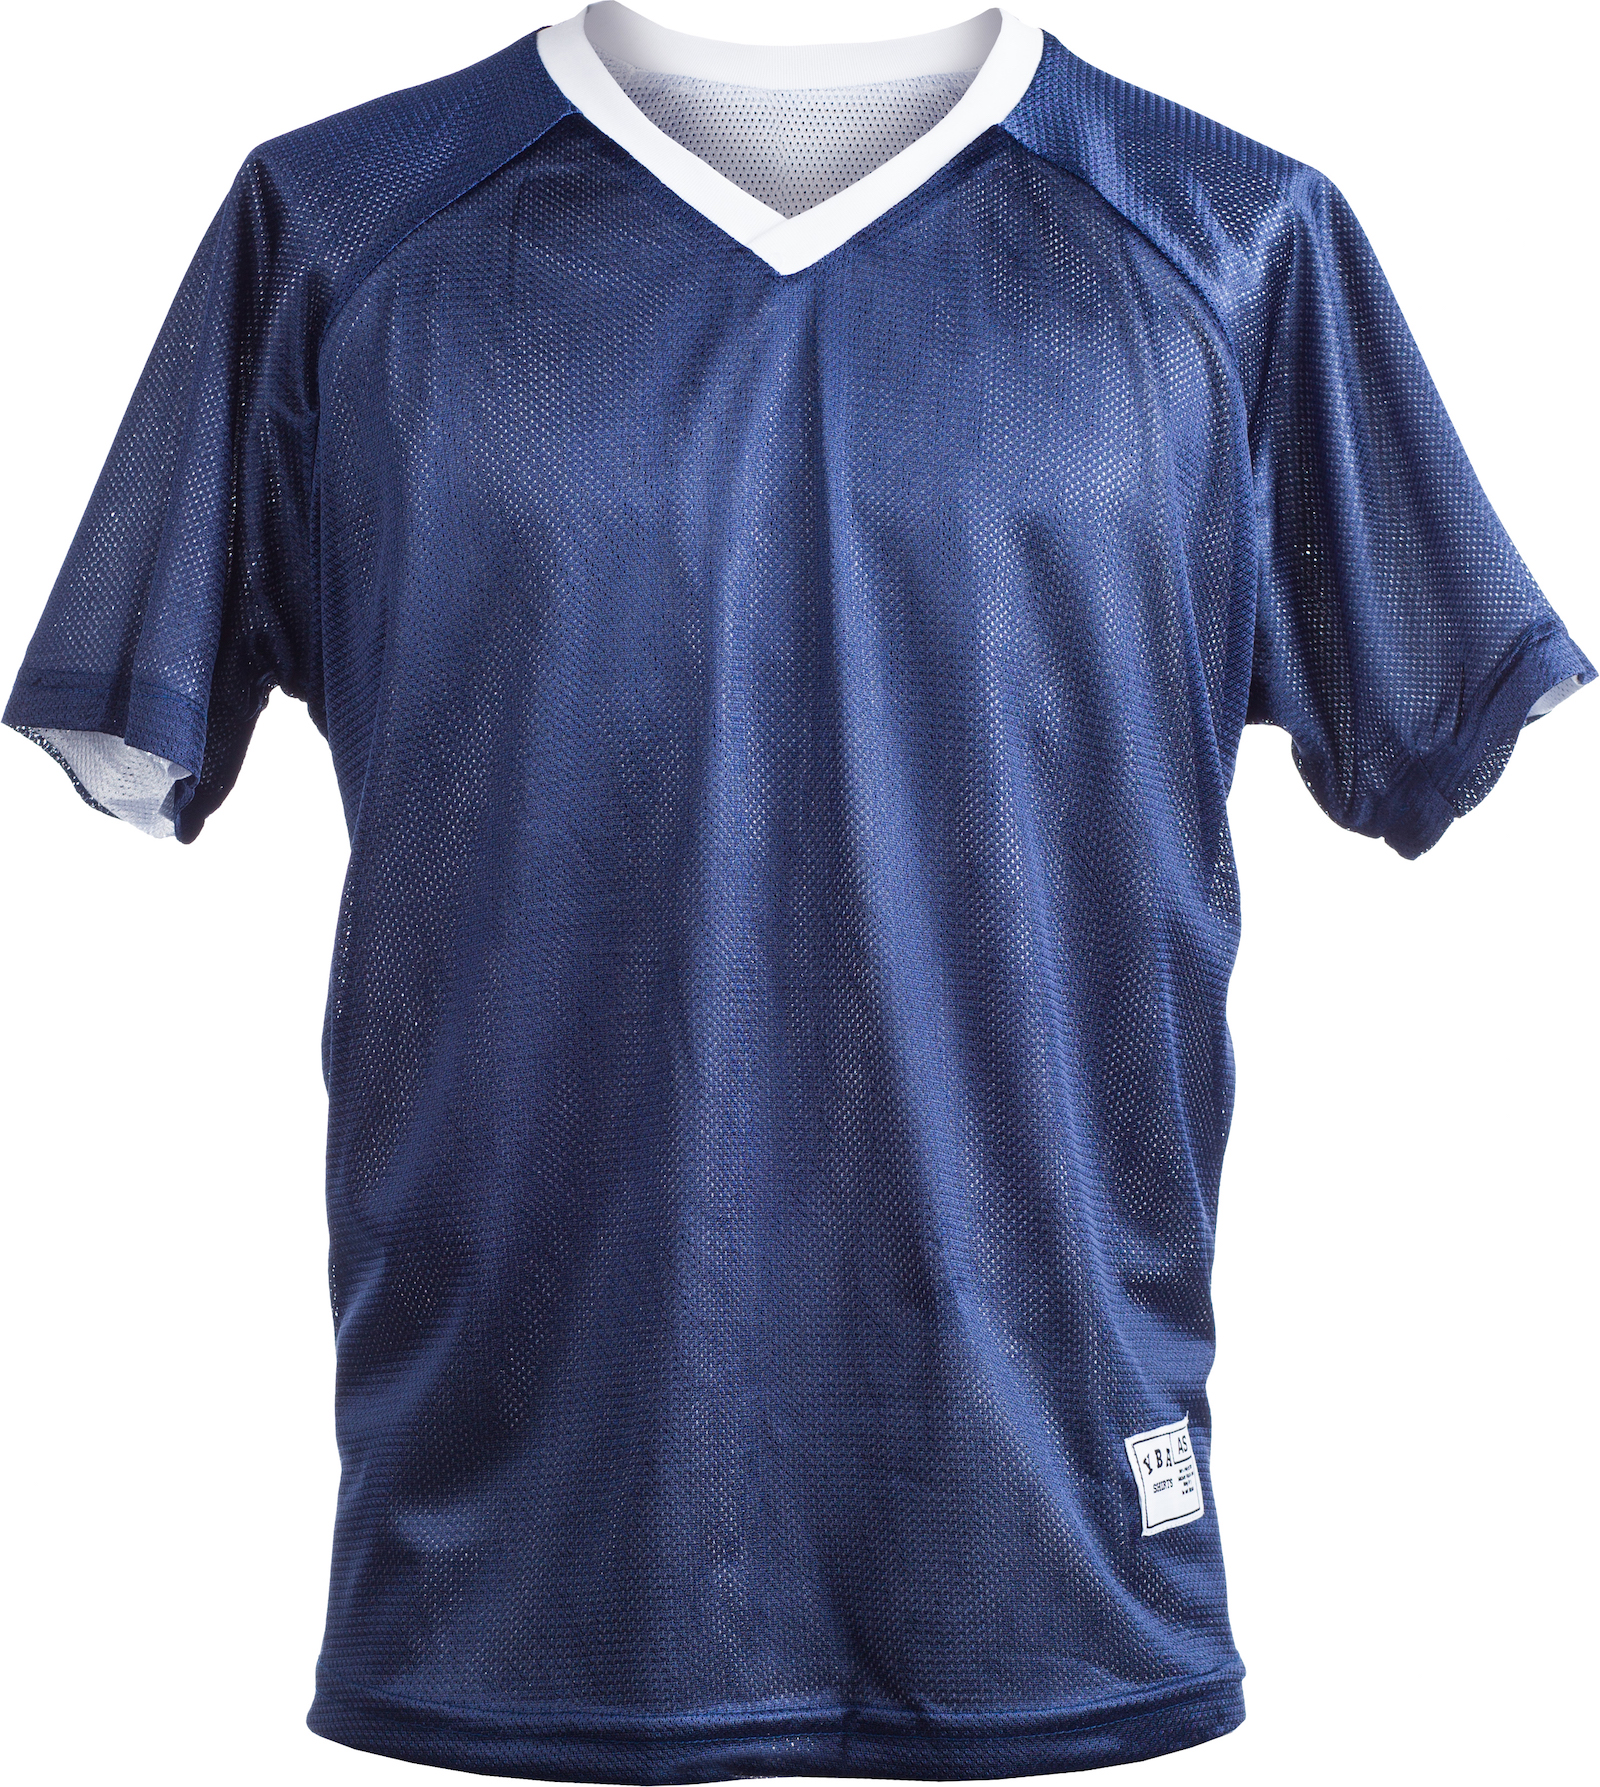 Reversible V-Neck Jersey with Trim | YBA Shirts